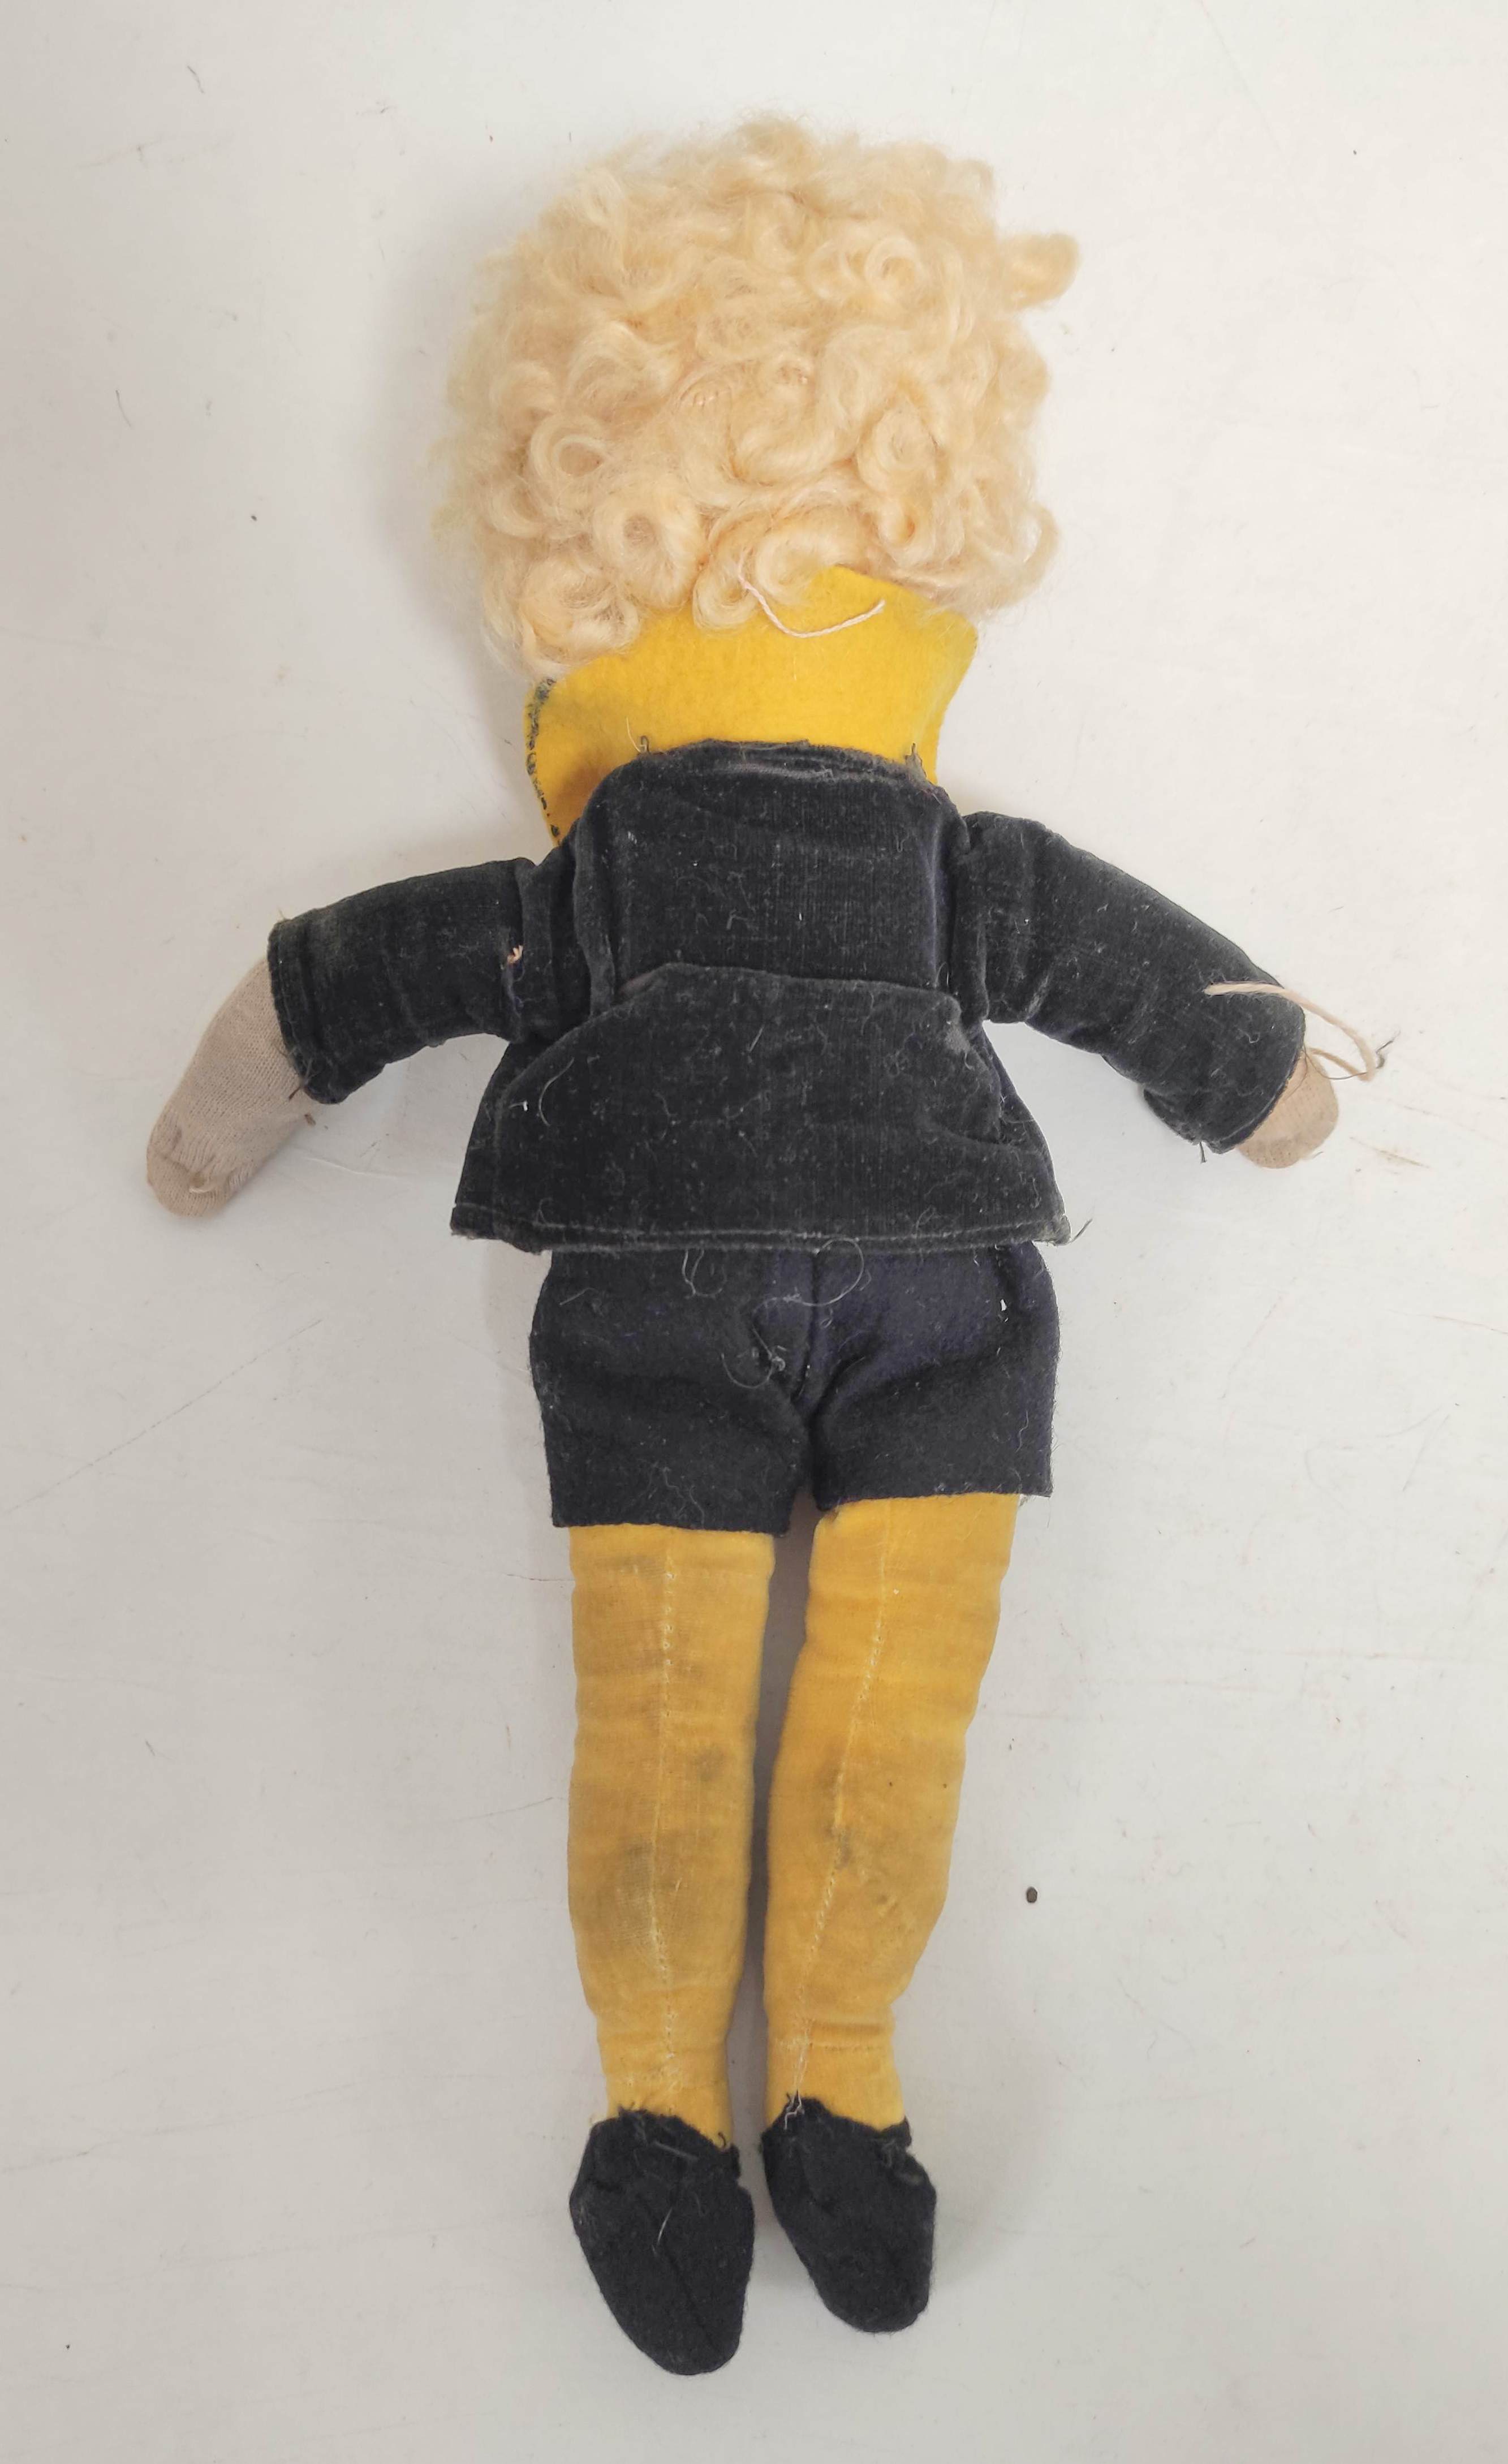 Vintage Chad Valley Hygienic Toys fabric child's doll. - Image 3 of 4